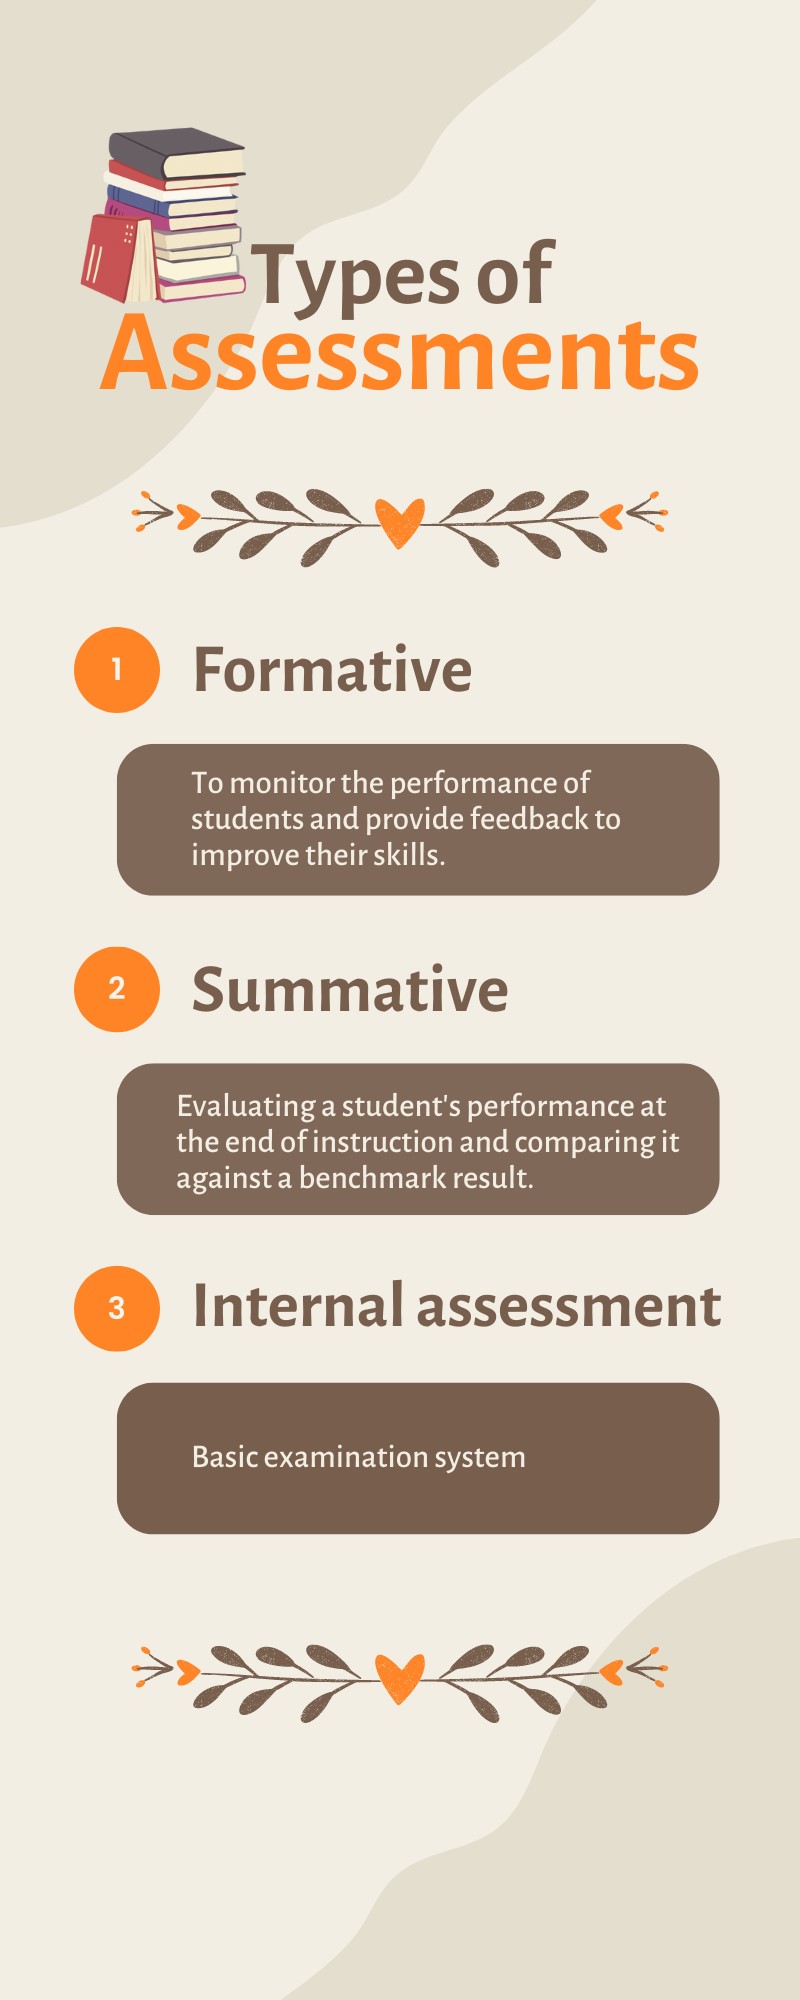 Types of Assessments